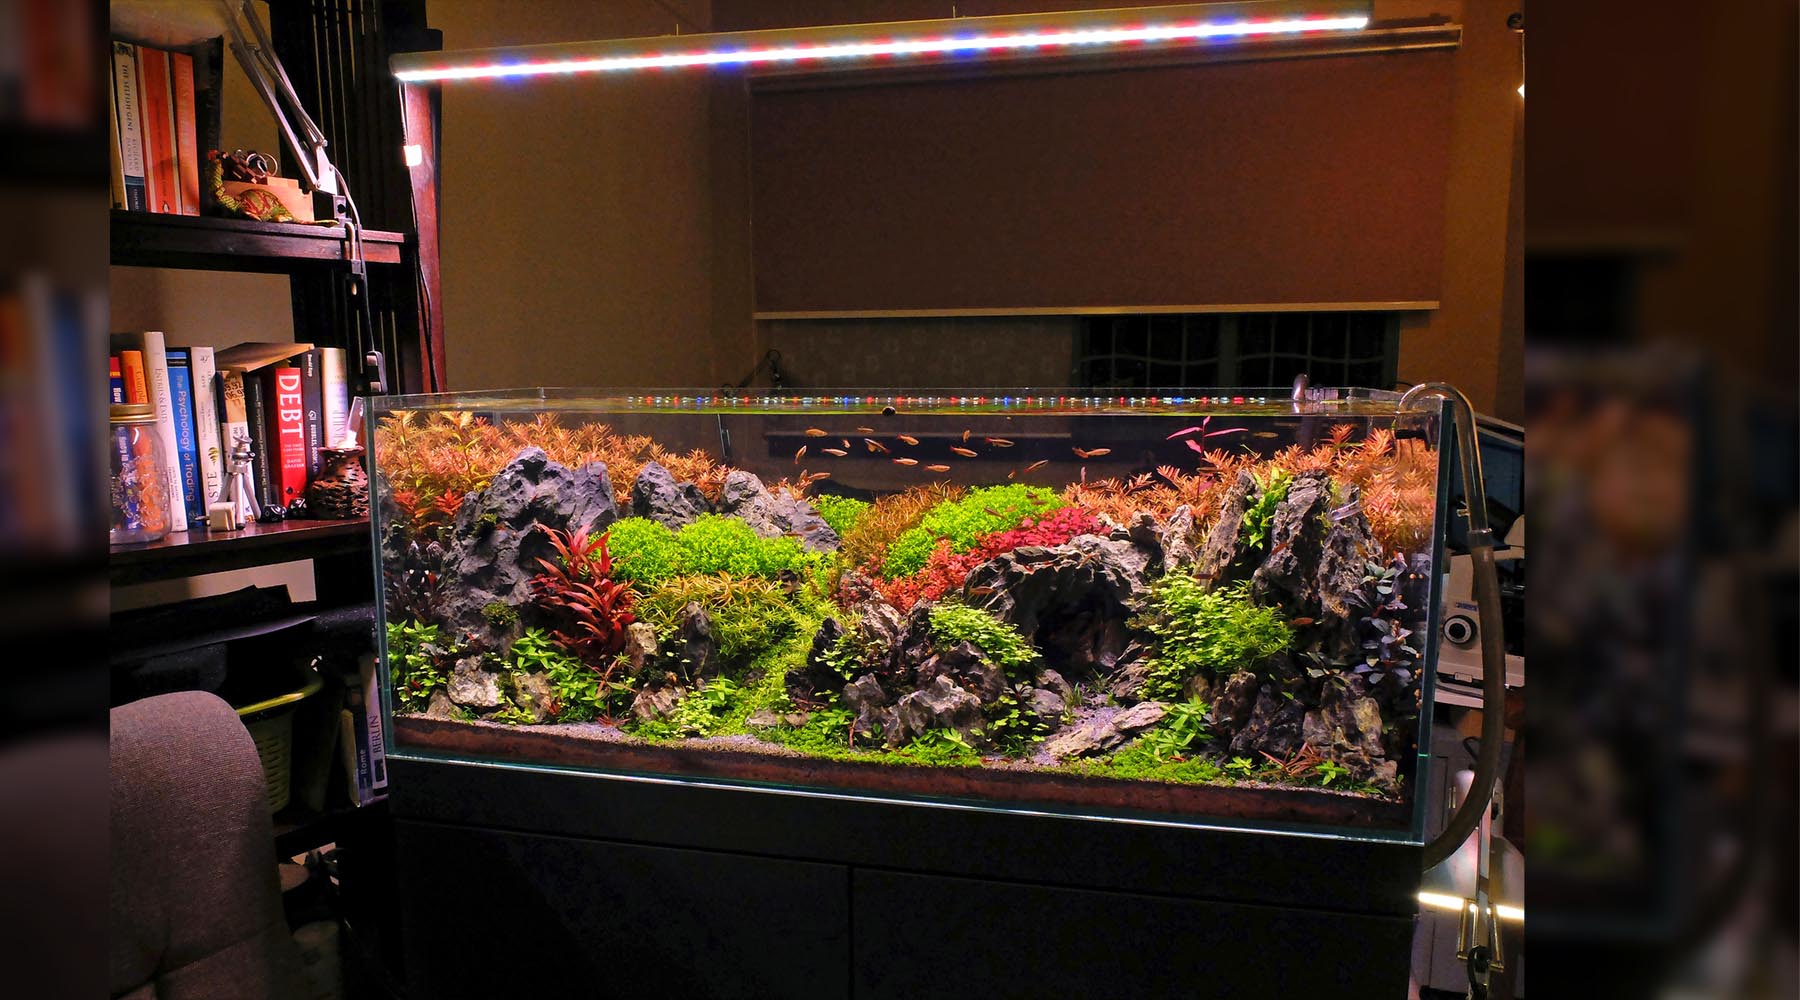 Dennis’s tank uses a custom build BML LED aquarium light for this planted tank. You can see the mix of Red, Blue and Warm white LEDs mixed with neutral white LEDs being used. Read this guide to find out how to choose the best aquarium lights for your planted tanks.